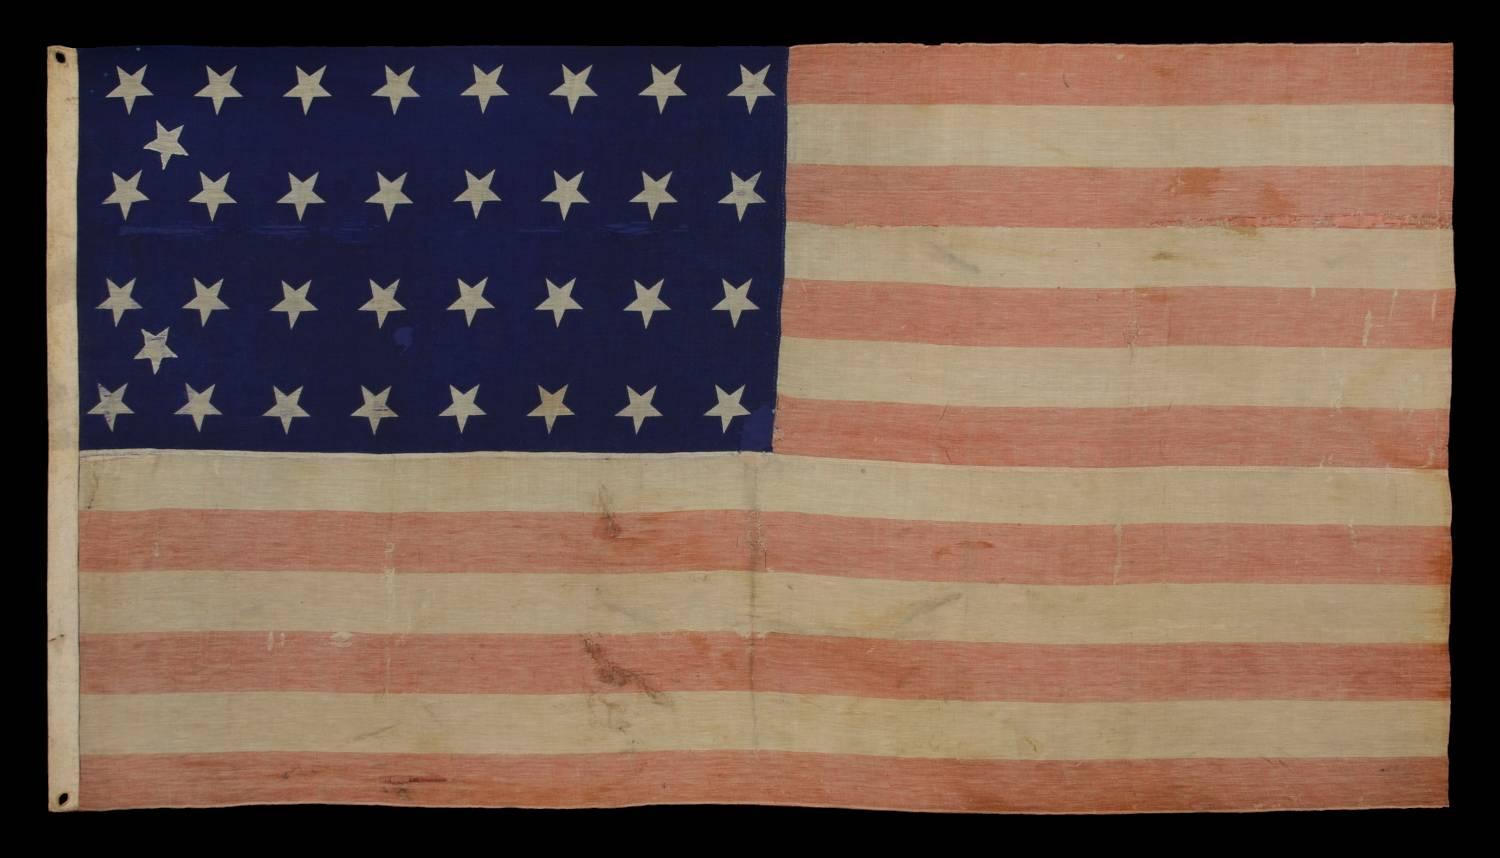 34 stars, Civil War period (1861-63), an unusual example with woven stripes and press-dyed stars, possibly made in New York by the Annin Company: 34 star flag, of the Civil War period, made of a press-dyed canton and woven stripes. This uncommon